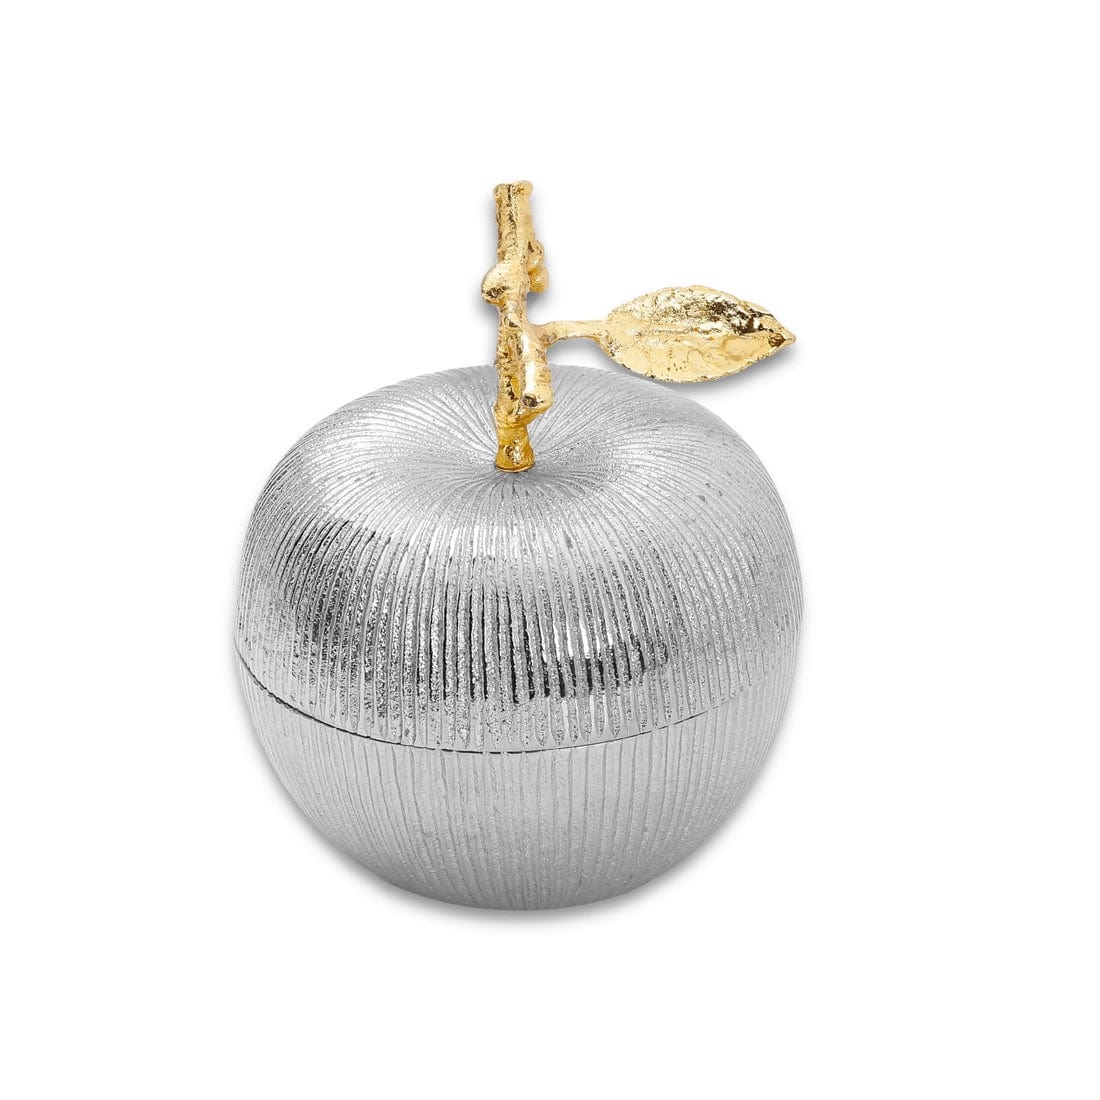 Classic Touch Decor Honey Dishes Small Silver and Gold Apple-Shaped Jar